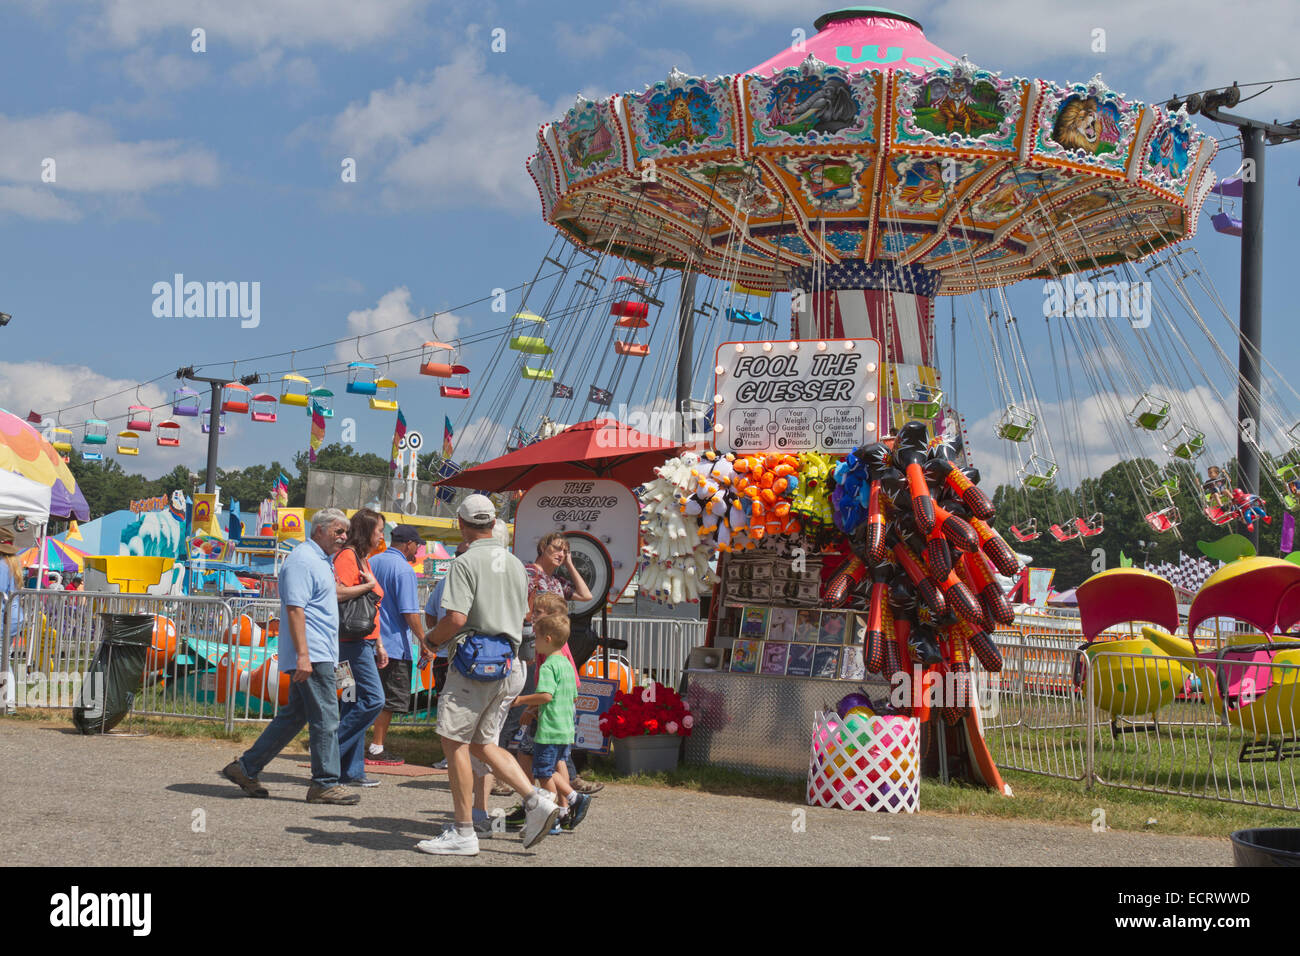 People enjoying the colorful games and rides at the state fair Stock Photo